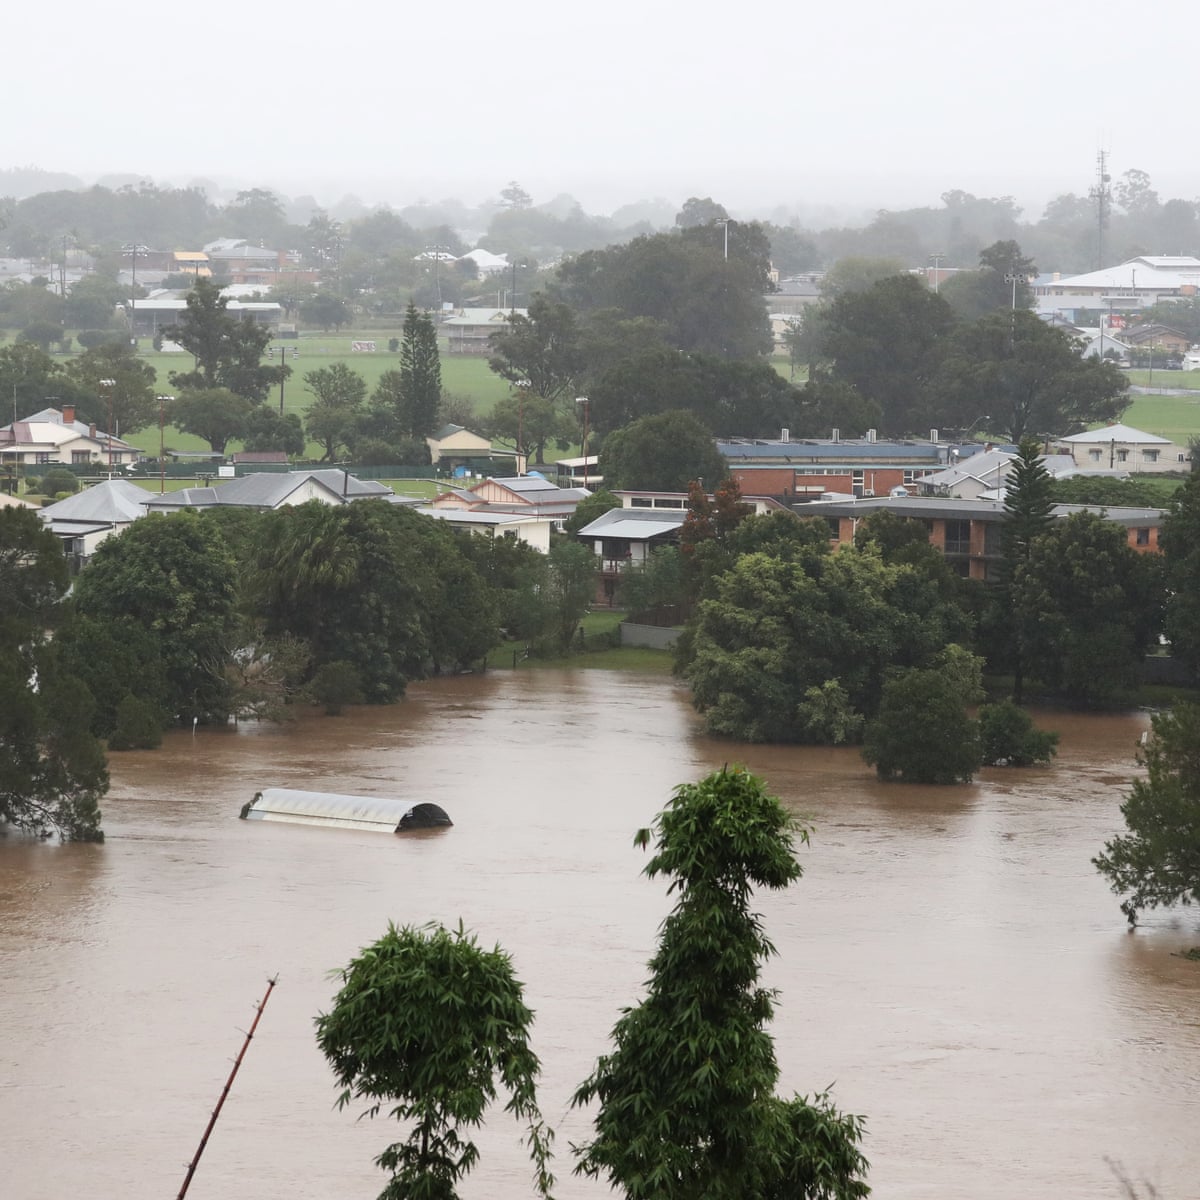 For some areas hit by NSW flood crisis, it's the fourth disaster in a year  | New South Wales | The Guardian